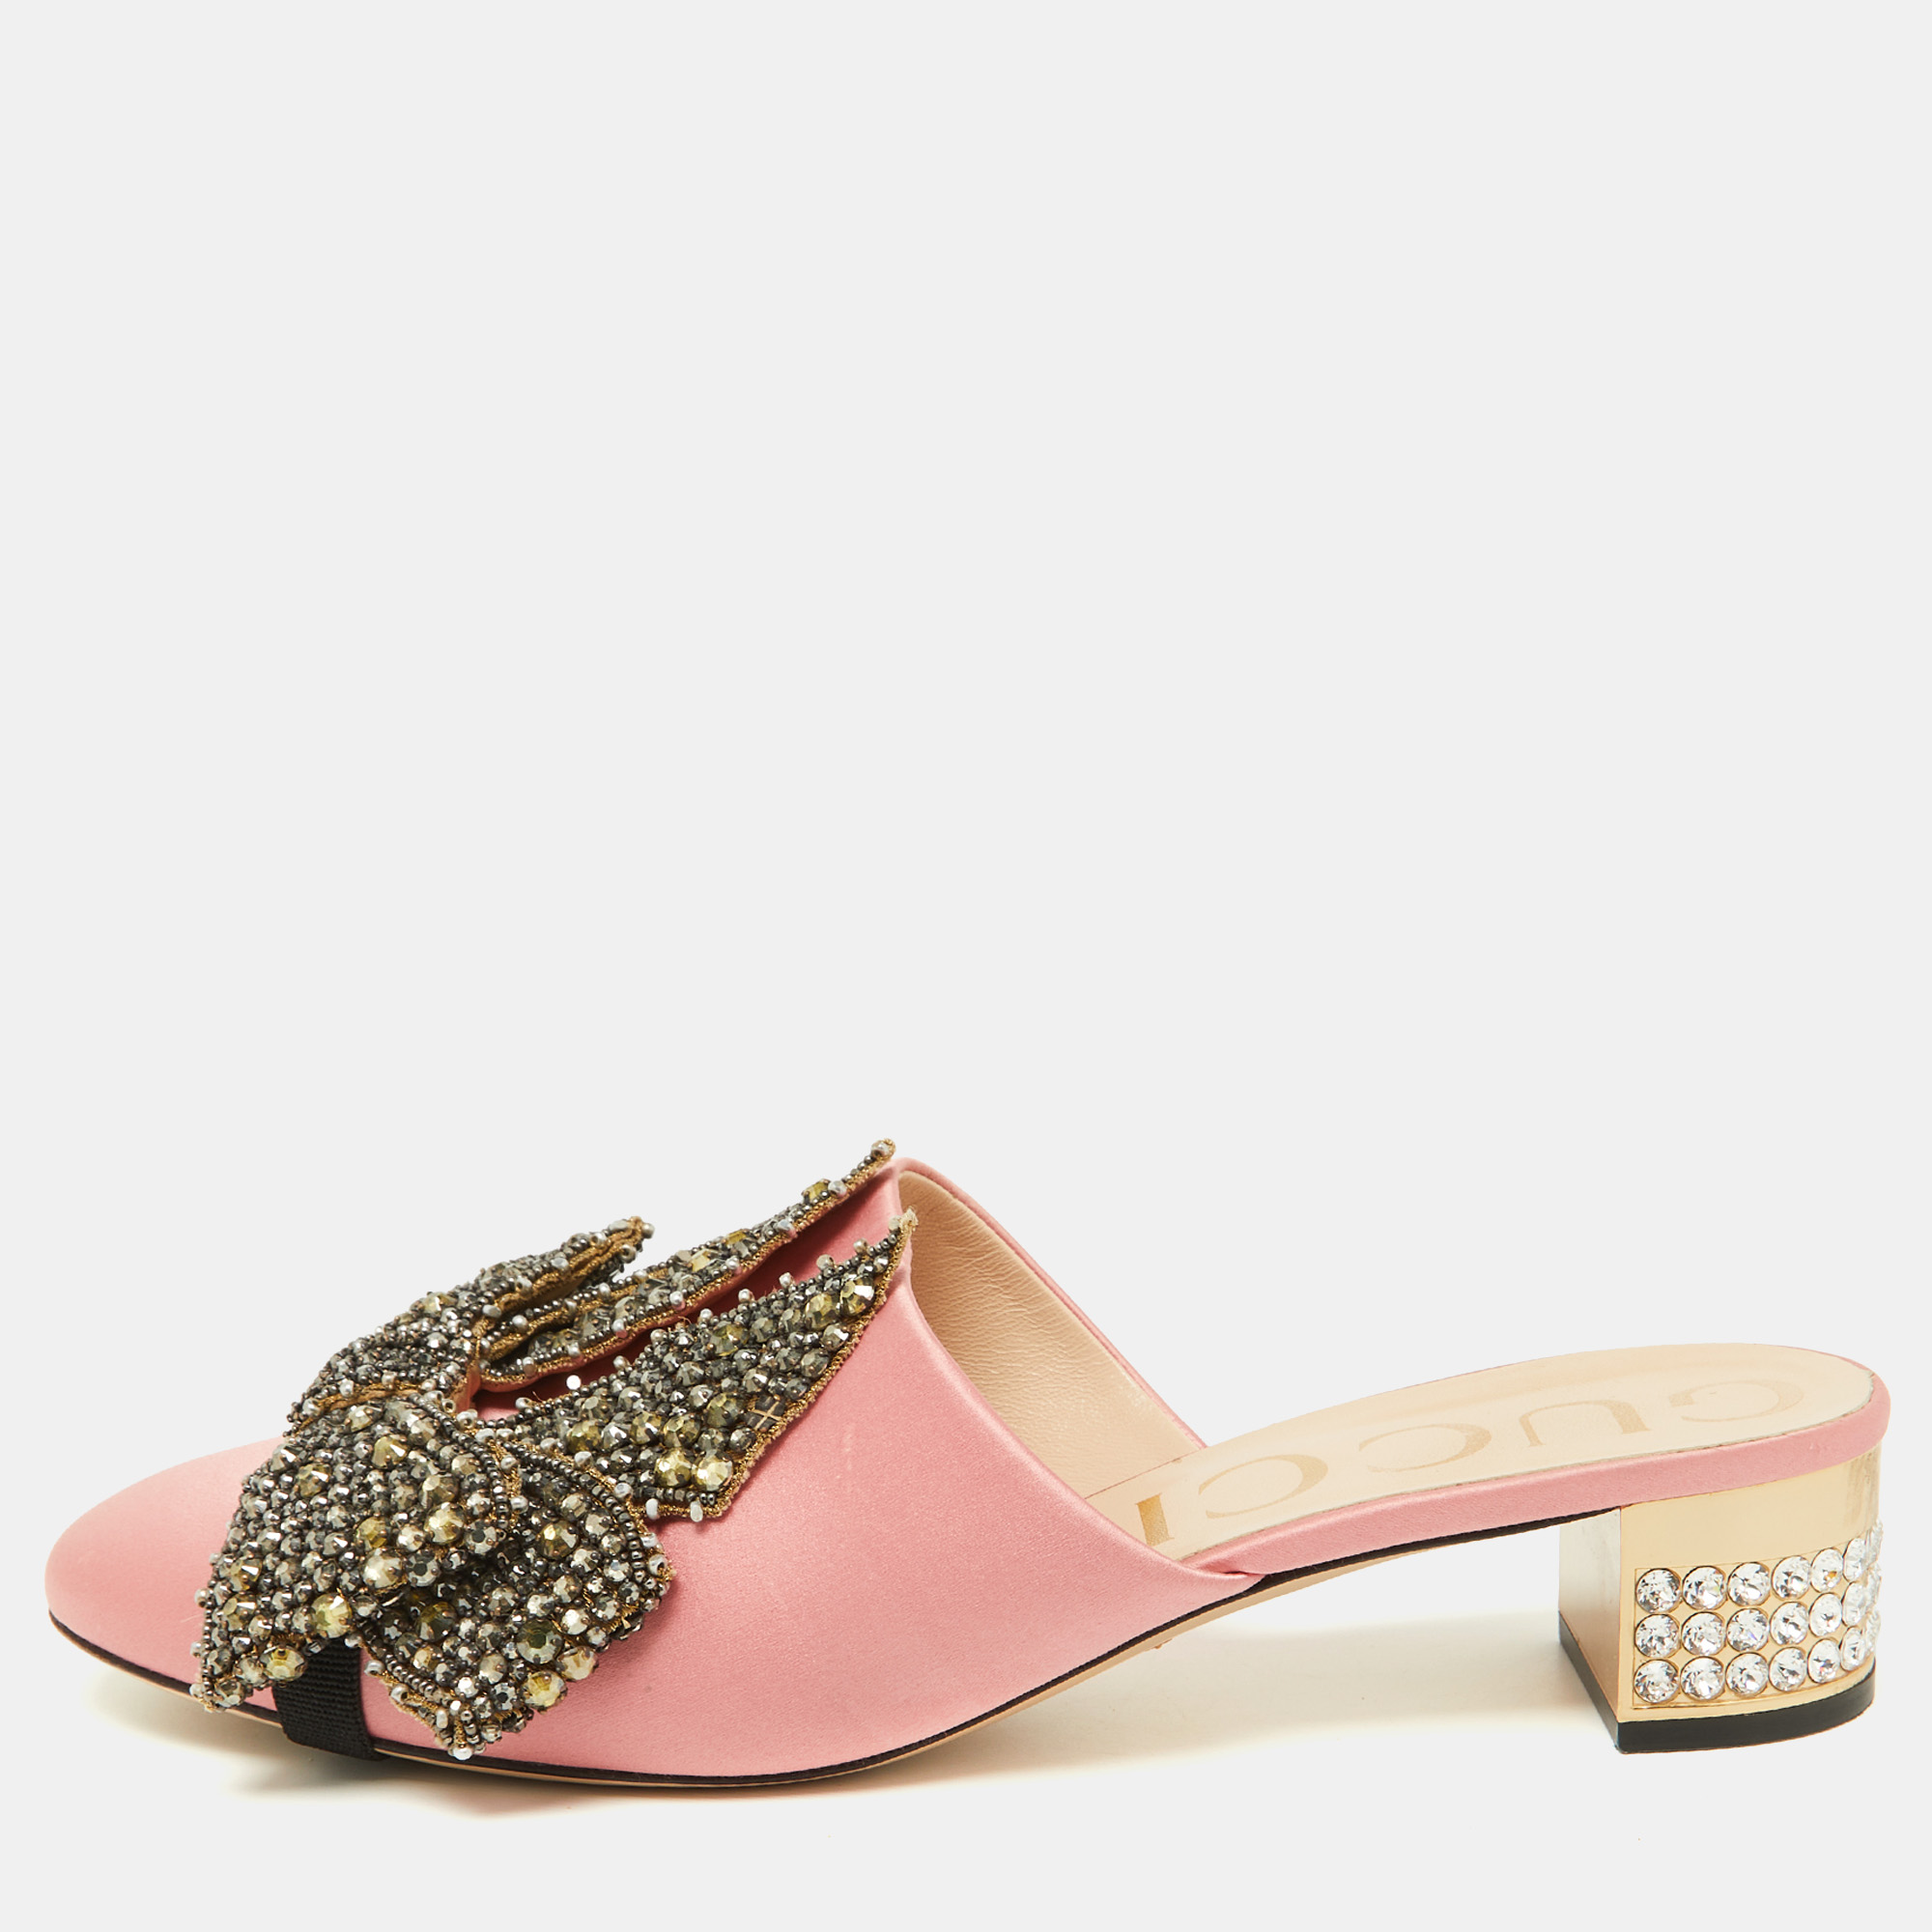 Gucci pink satin crystal embellished bow mules size 41.5